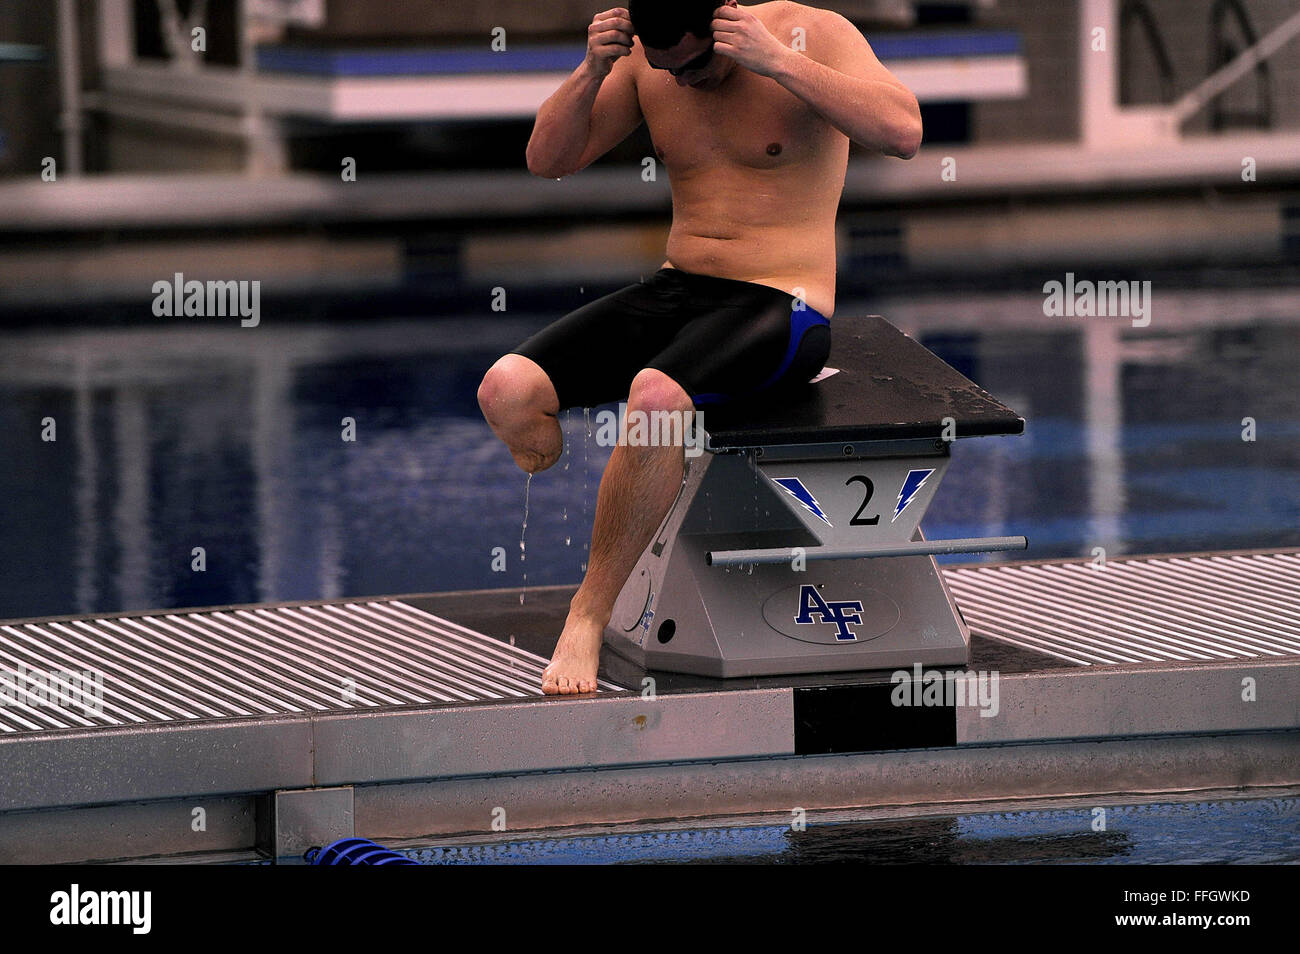 1st Lt. Ryan McGuire, a two-time participant in the Warrior Games, prepares himself for another swimming set from the starting blocks at the U.S. Air Force Academy pool during the Air Force selection camp for the 2012 Warrior Games. Stock Photo